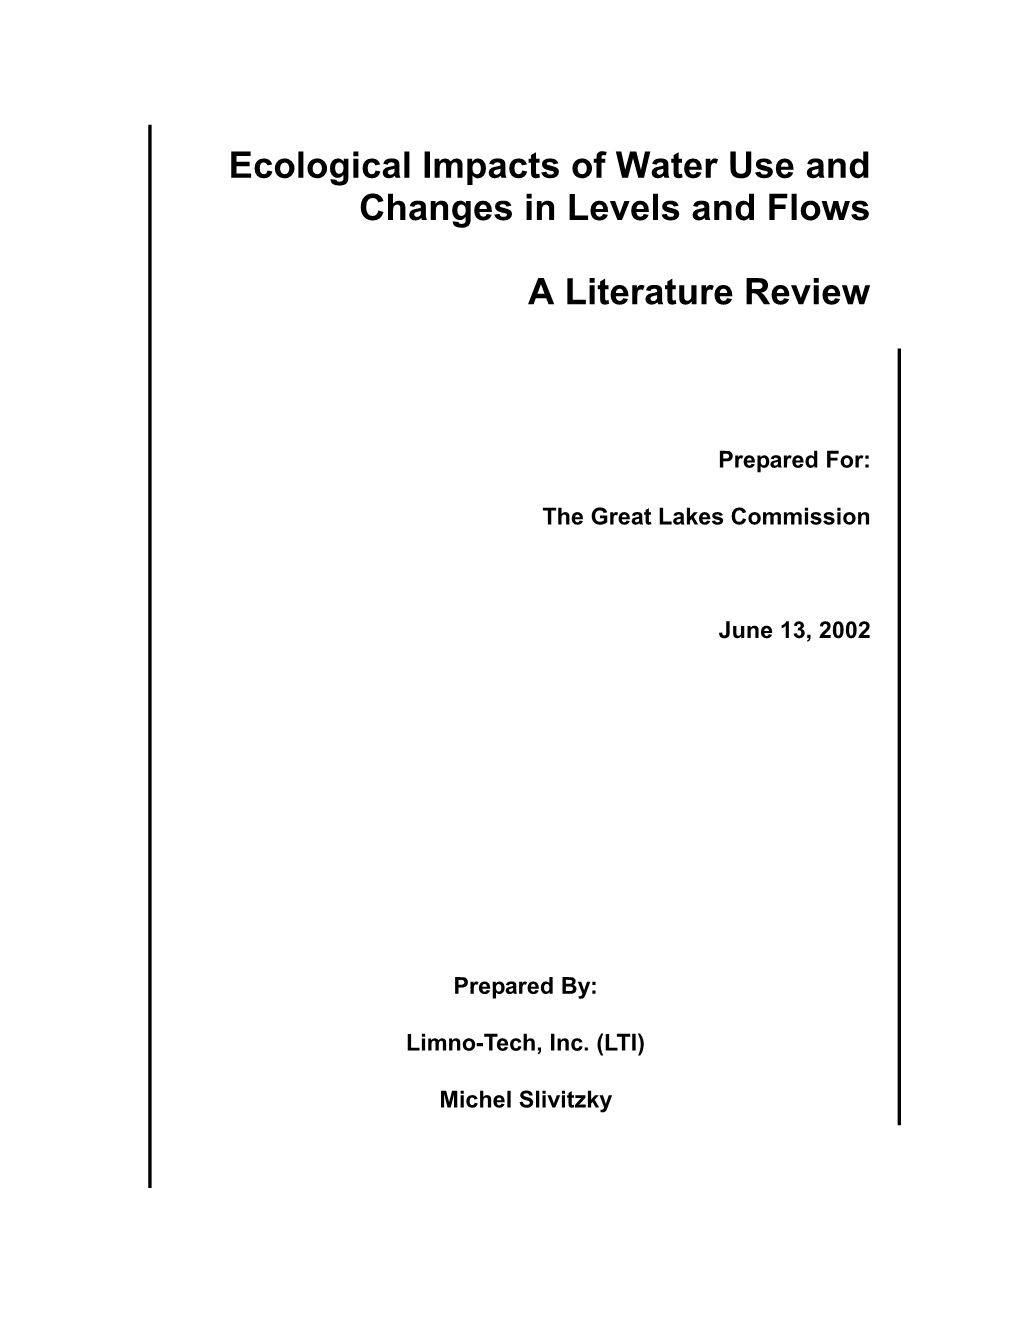 Ecological Impacts of Water Use and Changes in Levels and Flows A